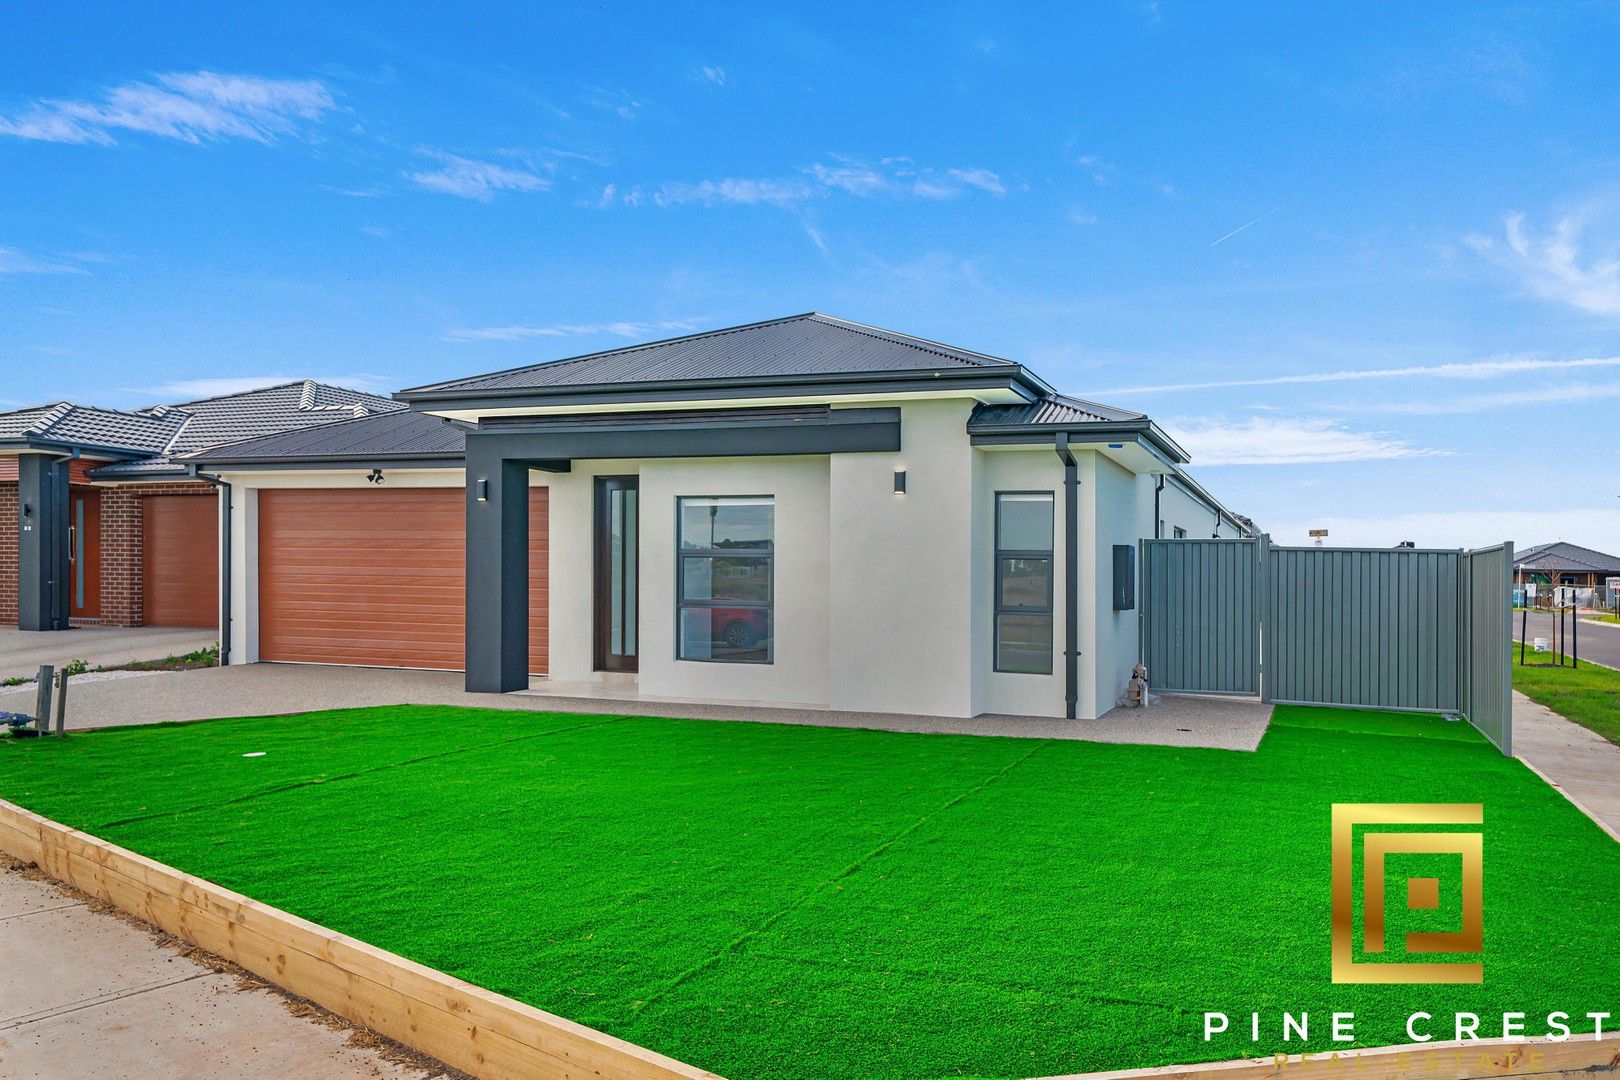 4 bedrooms New House & Land in 12 Woonan Dr WYNDHAM VALE VIC, 3024